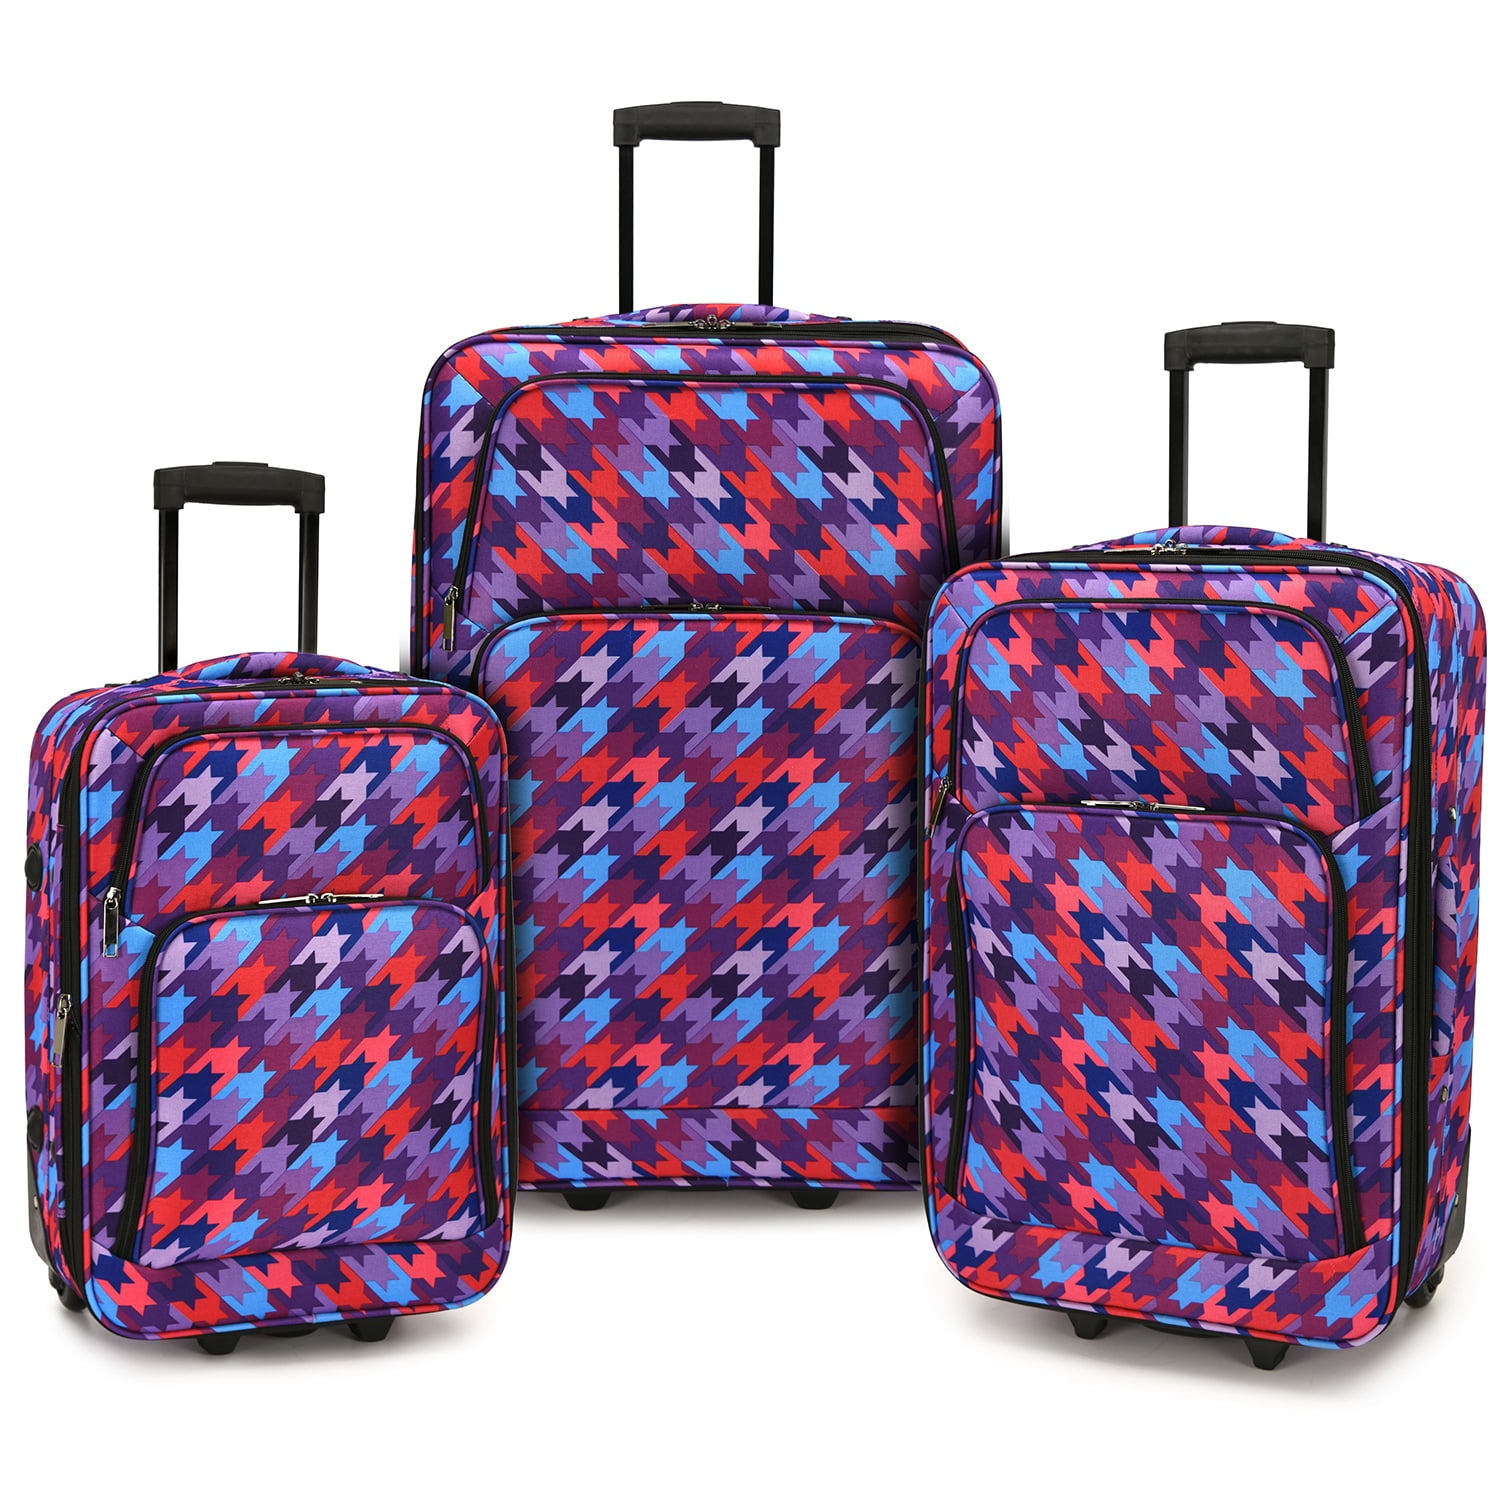 Houndstooth 3-Piece Expandable Rolling Luggage Set - Walmart.com